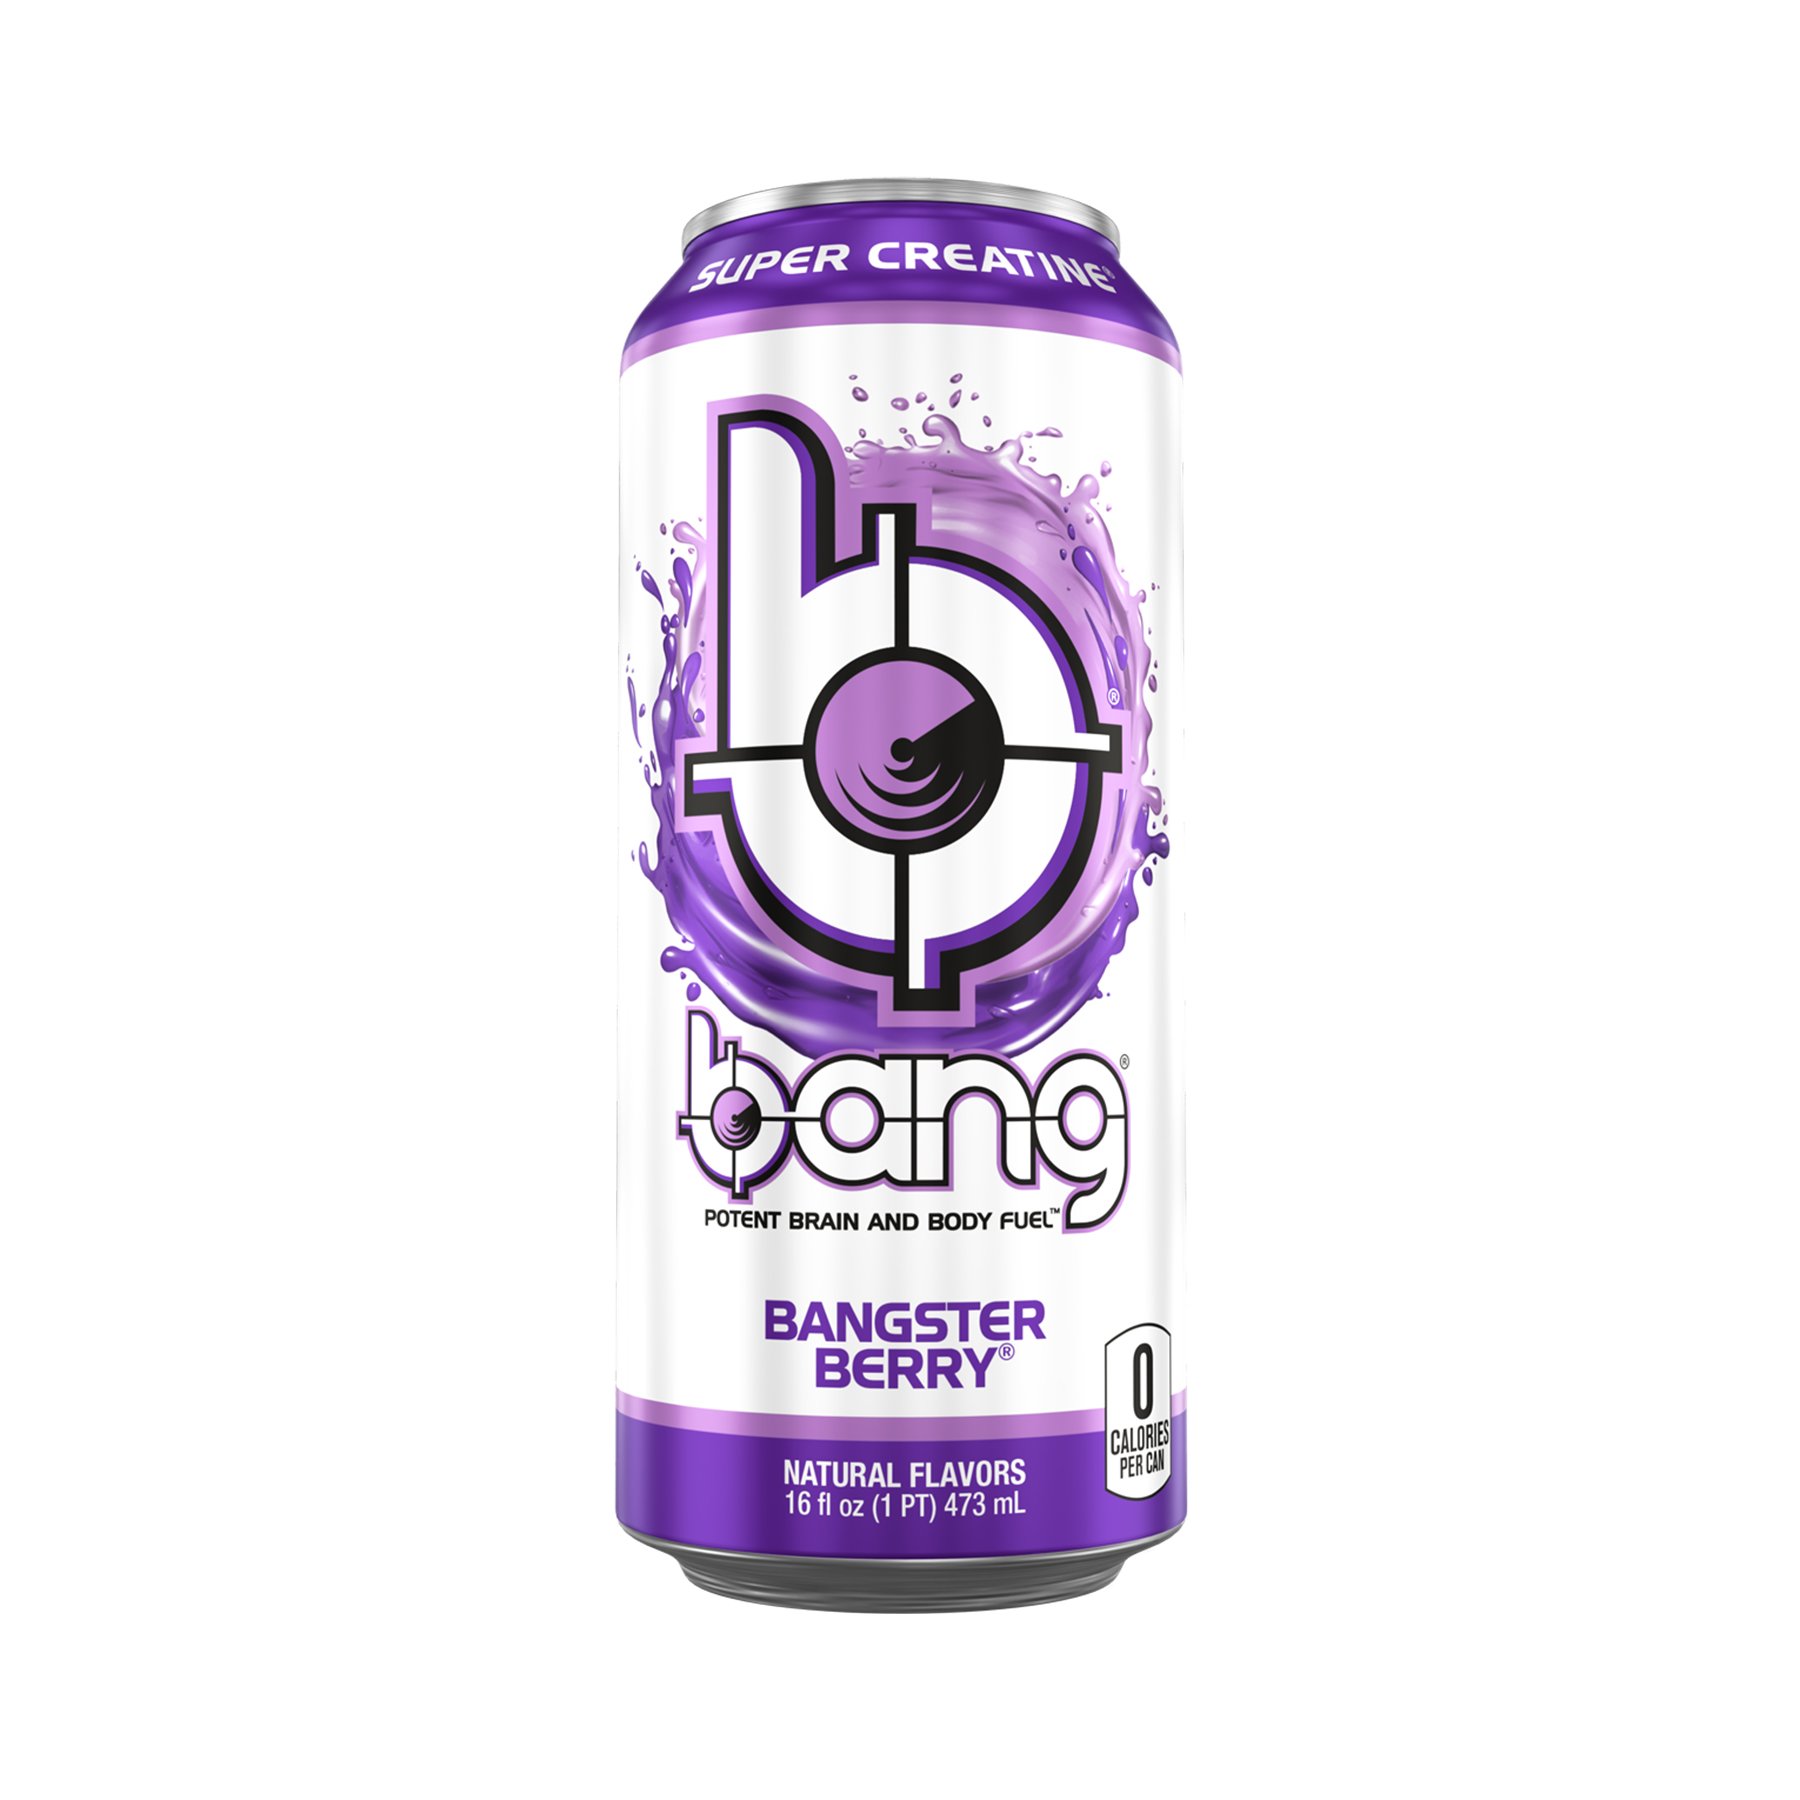 Bangster Berry